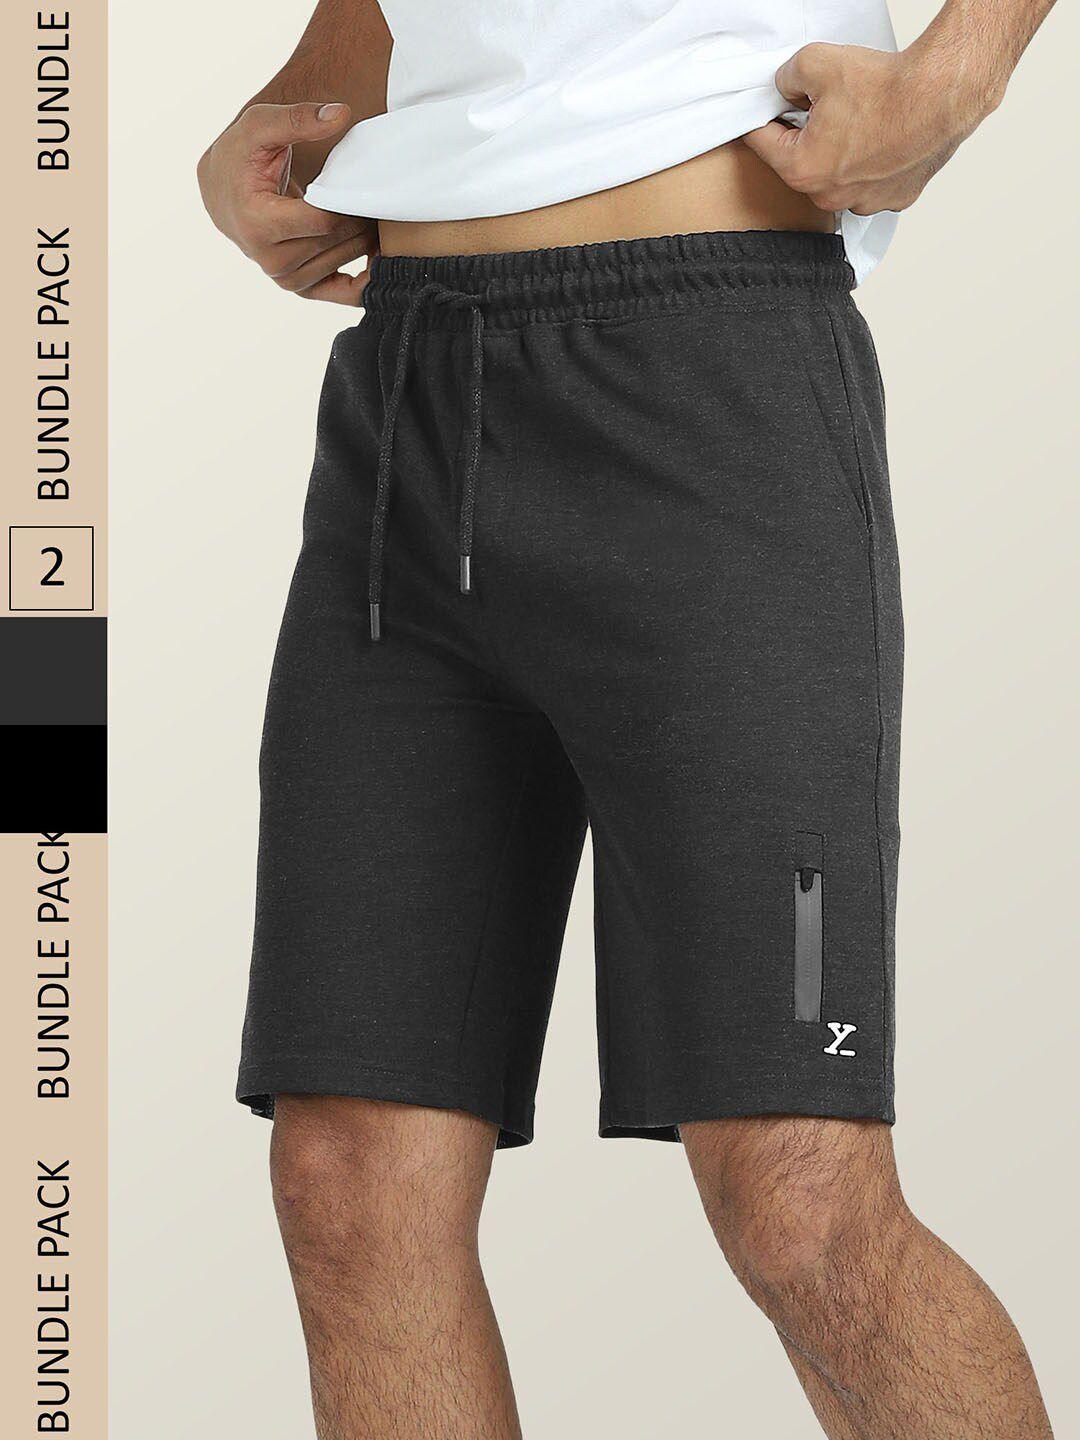 xyxx men athleisure hype pack of 2 cotton casual shorts